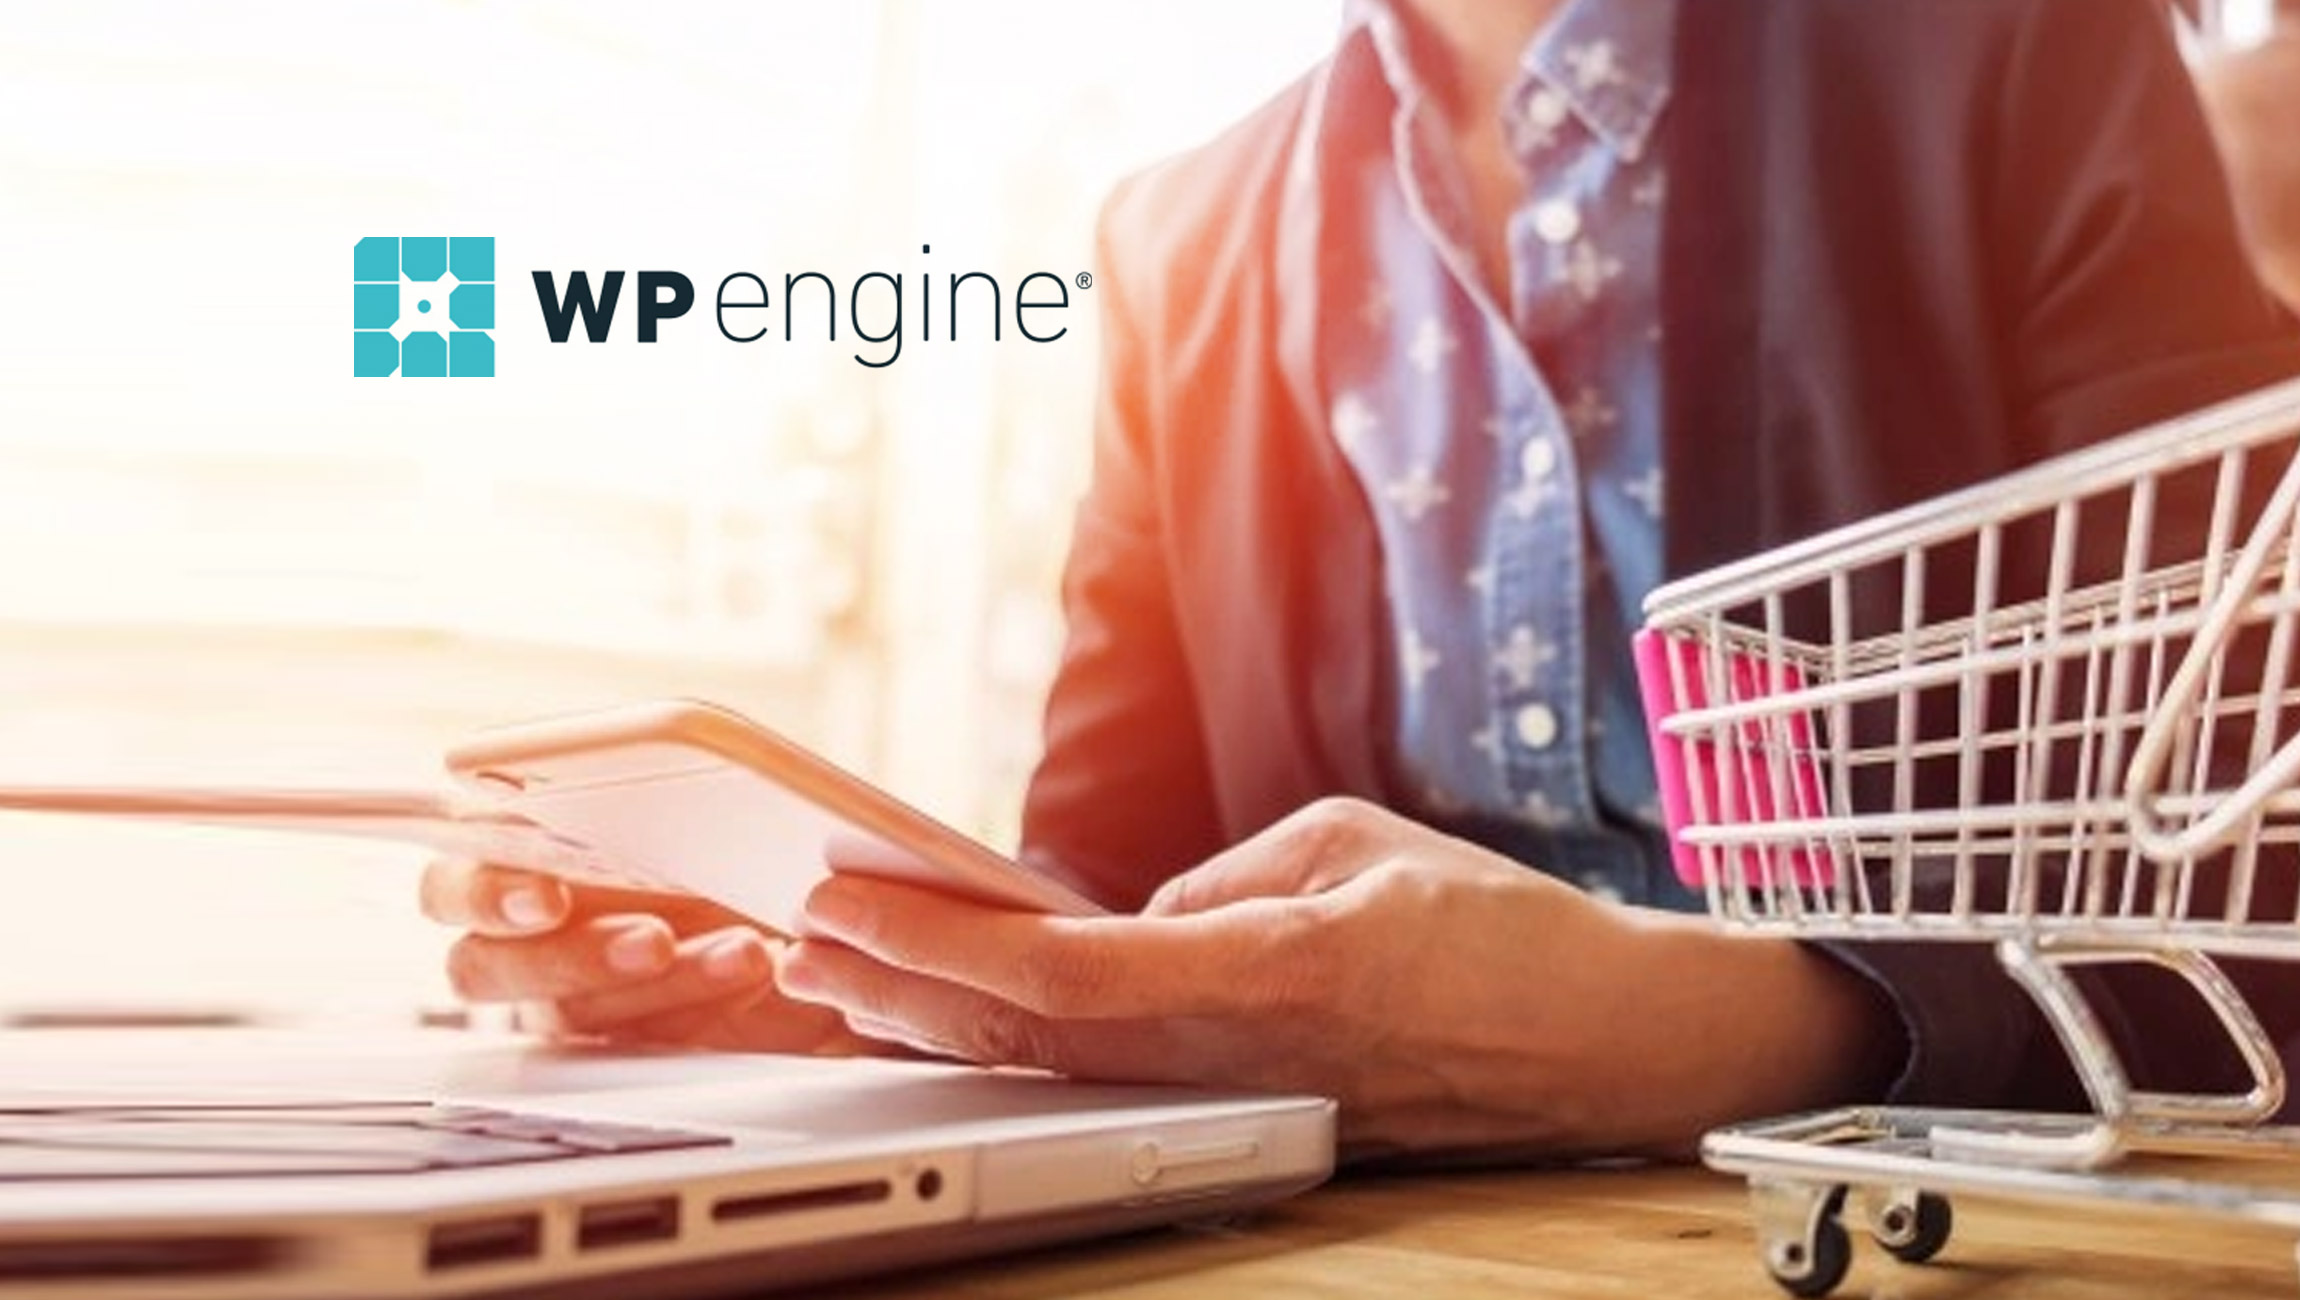 Building Your Business Online: WP Engine Announces New eCommerce Solution for Small/Medium Businesses